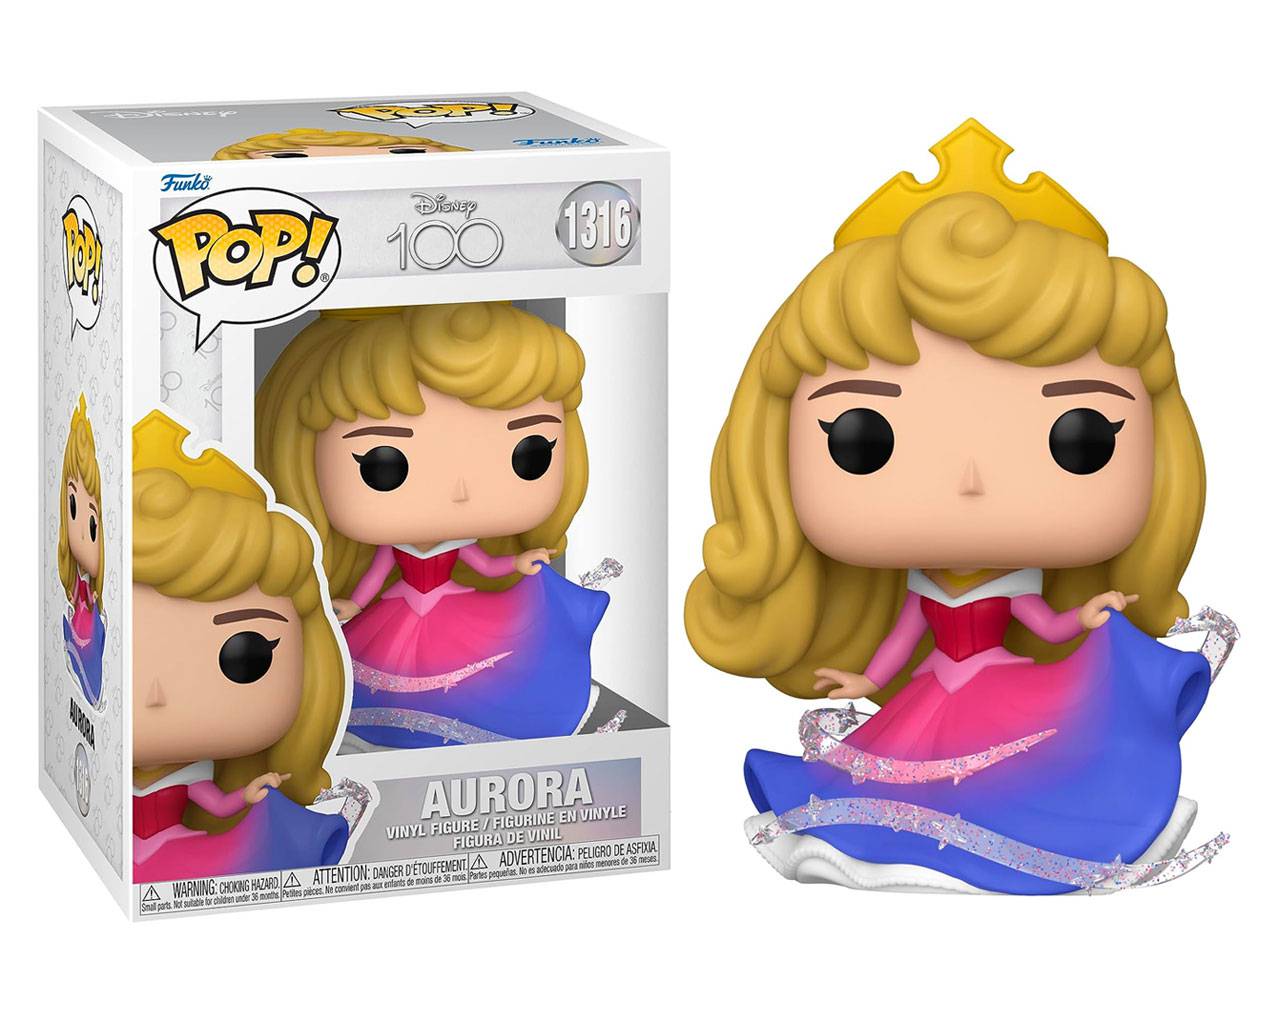 Aurora in Color Changing Dress (Magic and Transformation) - Disney 100 Years of Wonder Pop! Vinyl